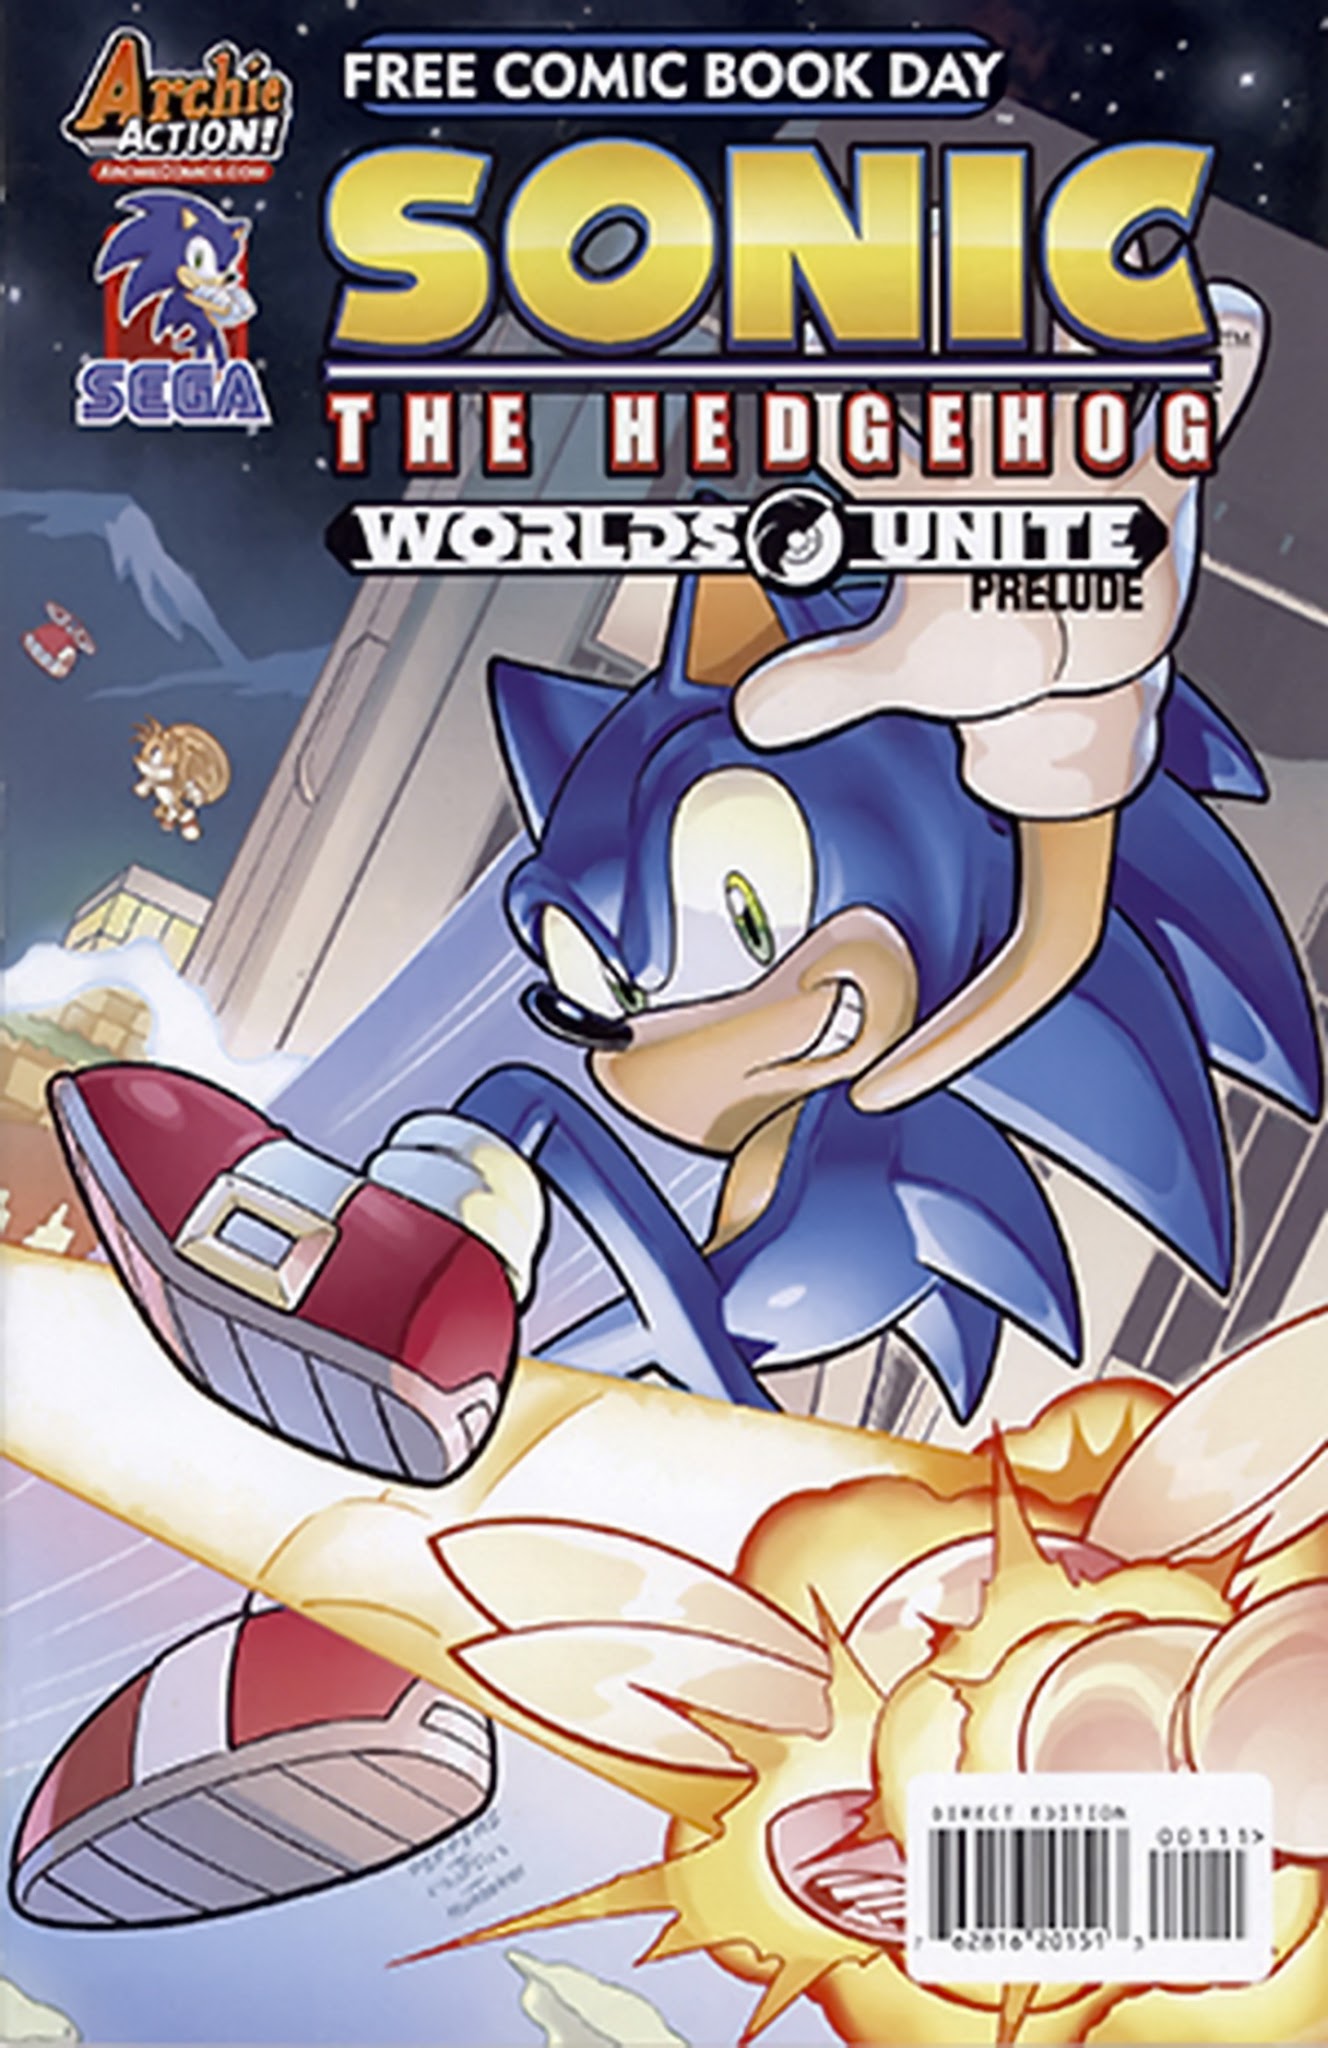 Read online Free Comic Book Day 2015 comic -  Issue # Sonic the Hedgehog - Mega Man Worlds Unite Prelude - 4